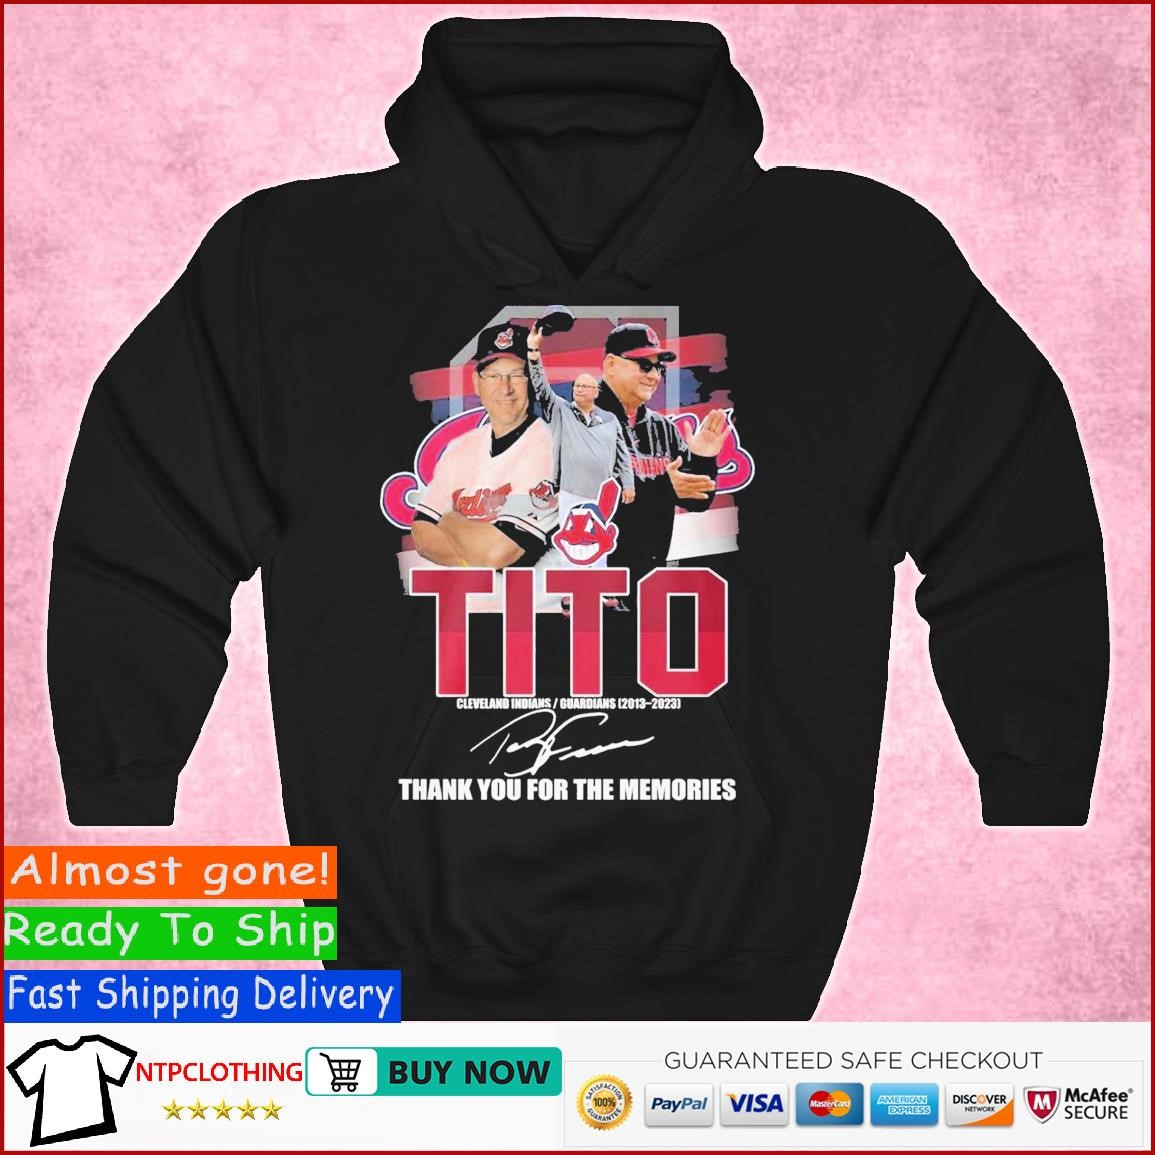 Tito Cleveland Indians, Guardians 2013 – 2023 Thank You For The Memories  Unisex T-Shirt, hoodie, sweater and long sleeve